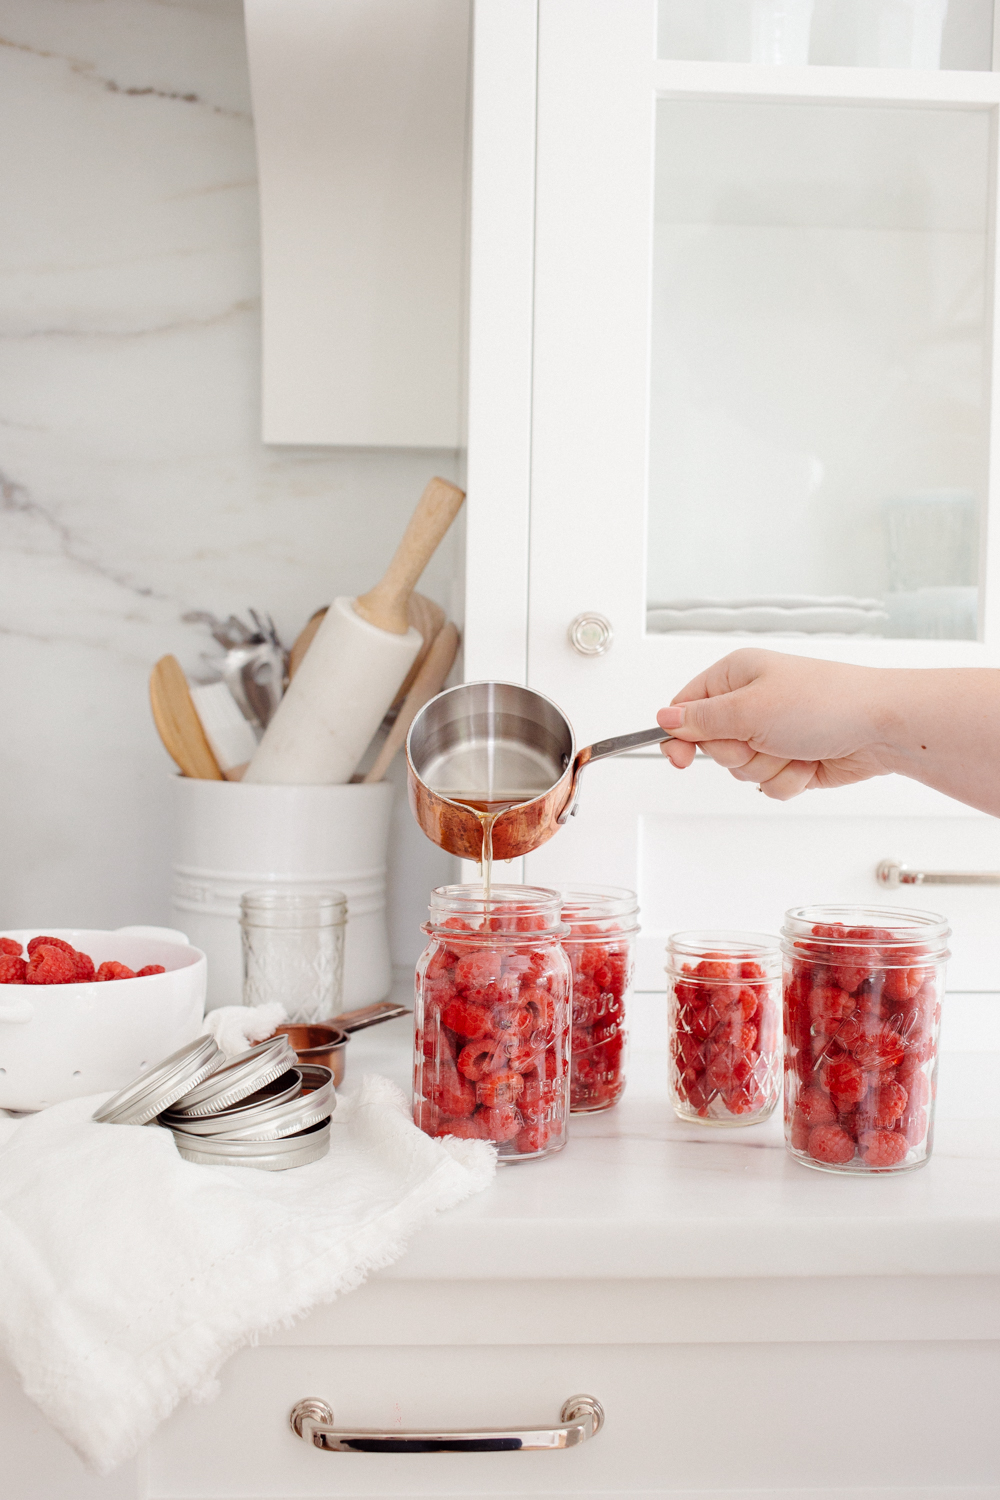 Pouring syrup into jars of raspberries